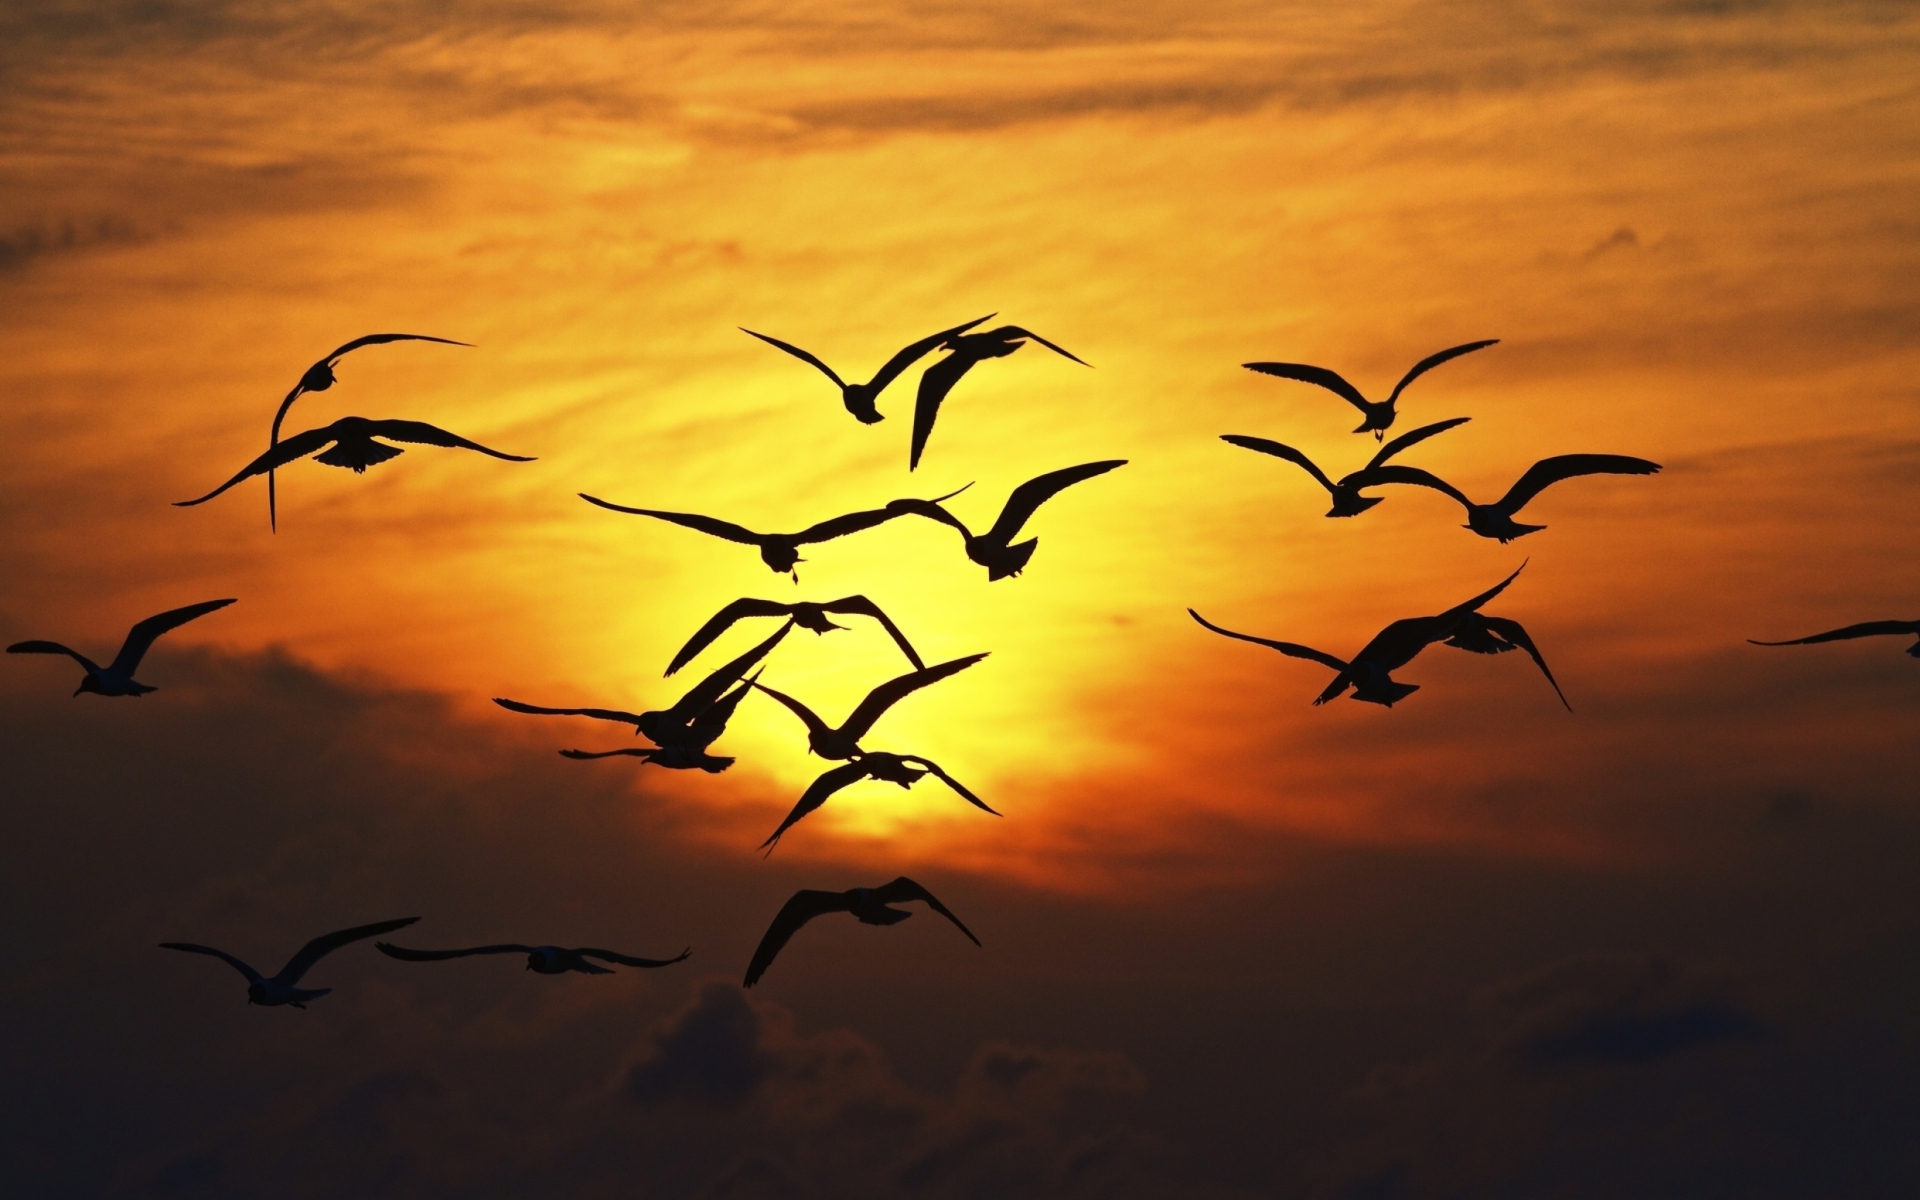 Birds Silhouettes At Sunset wallpaper 1920x1200